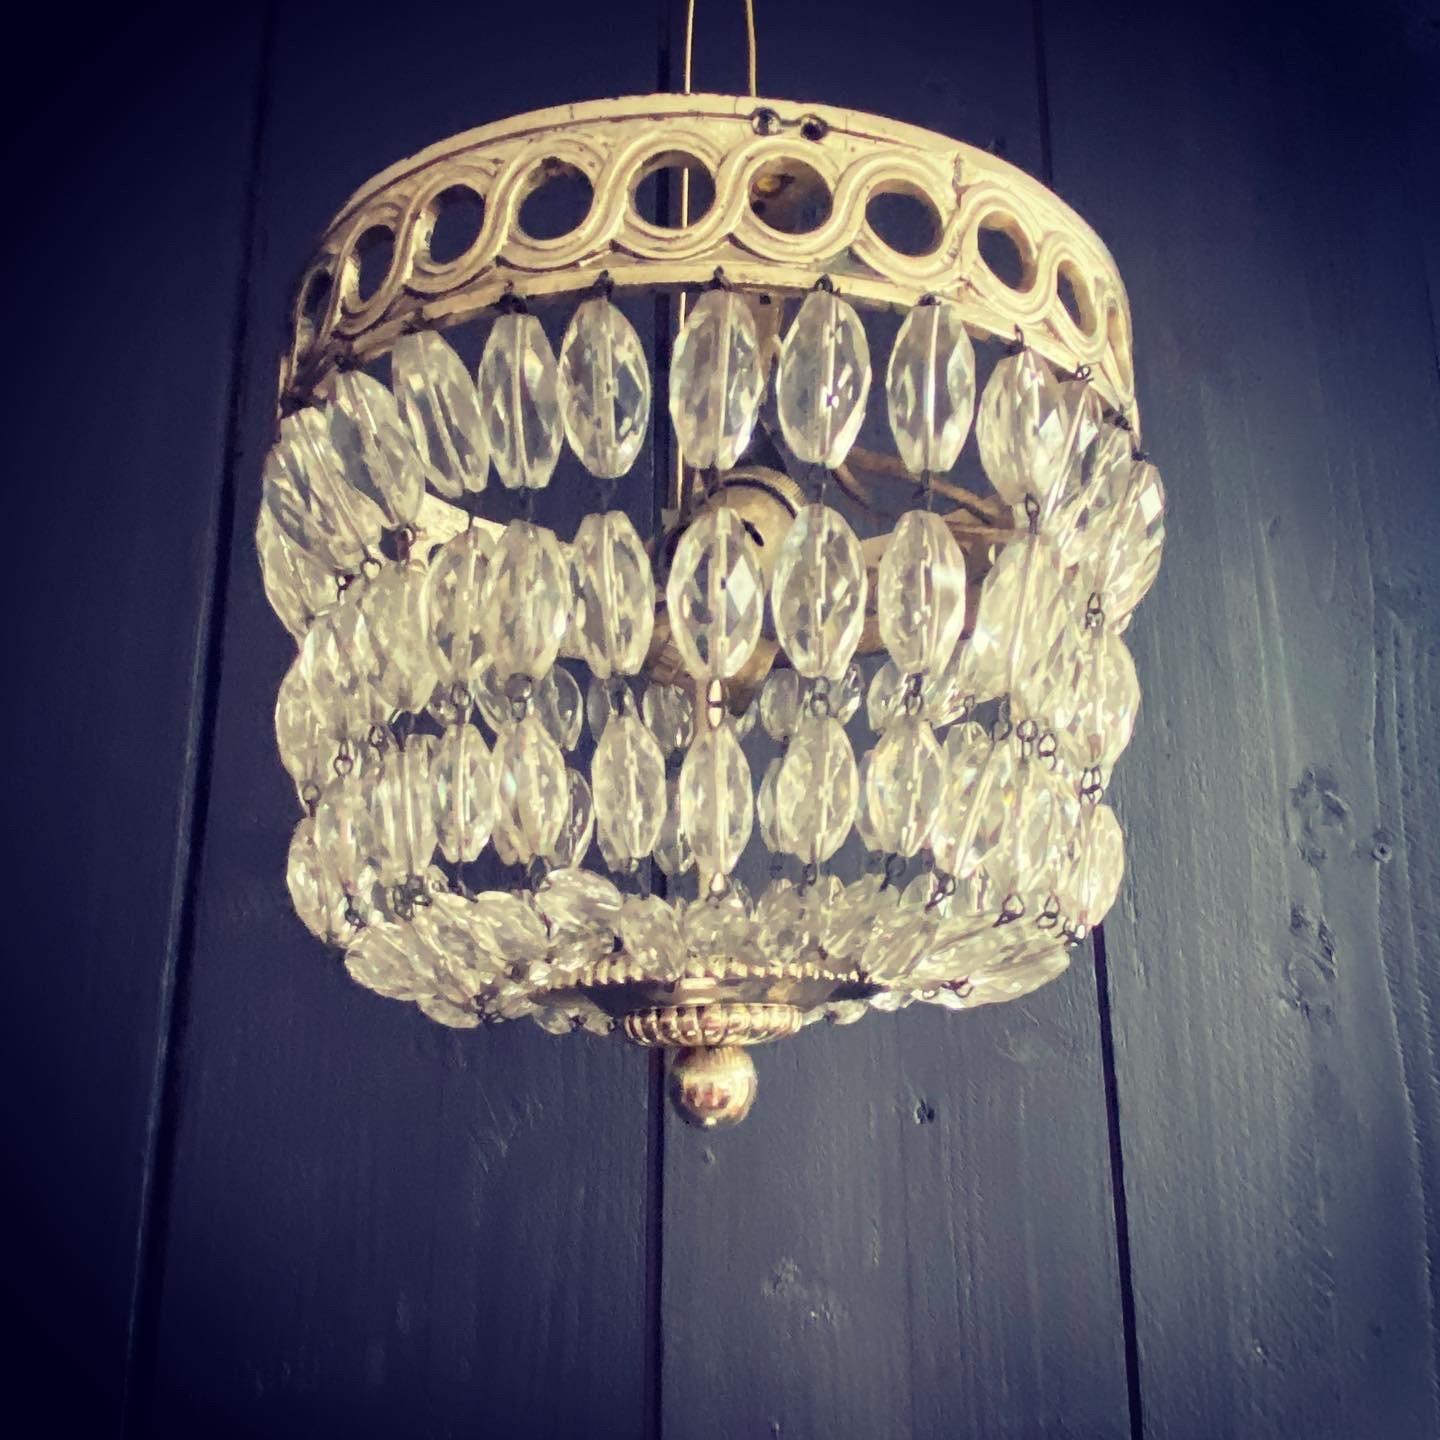 Silver gilt baguette chandelier of small proportions, circa 1920. Attractive Grecian scroll decoration with pretty droplets which terminate into an attractive gadrooned finial. Glass is all present and complete. Fitted with two bulb holders. Would